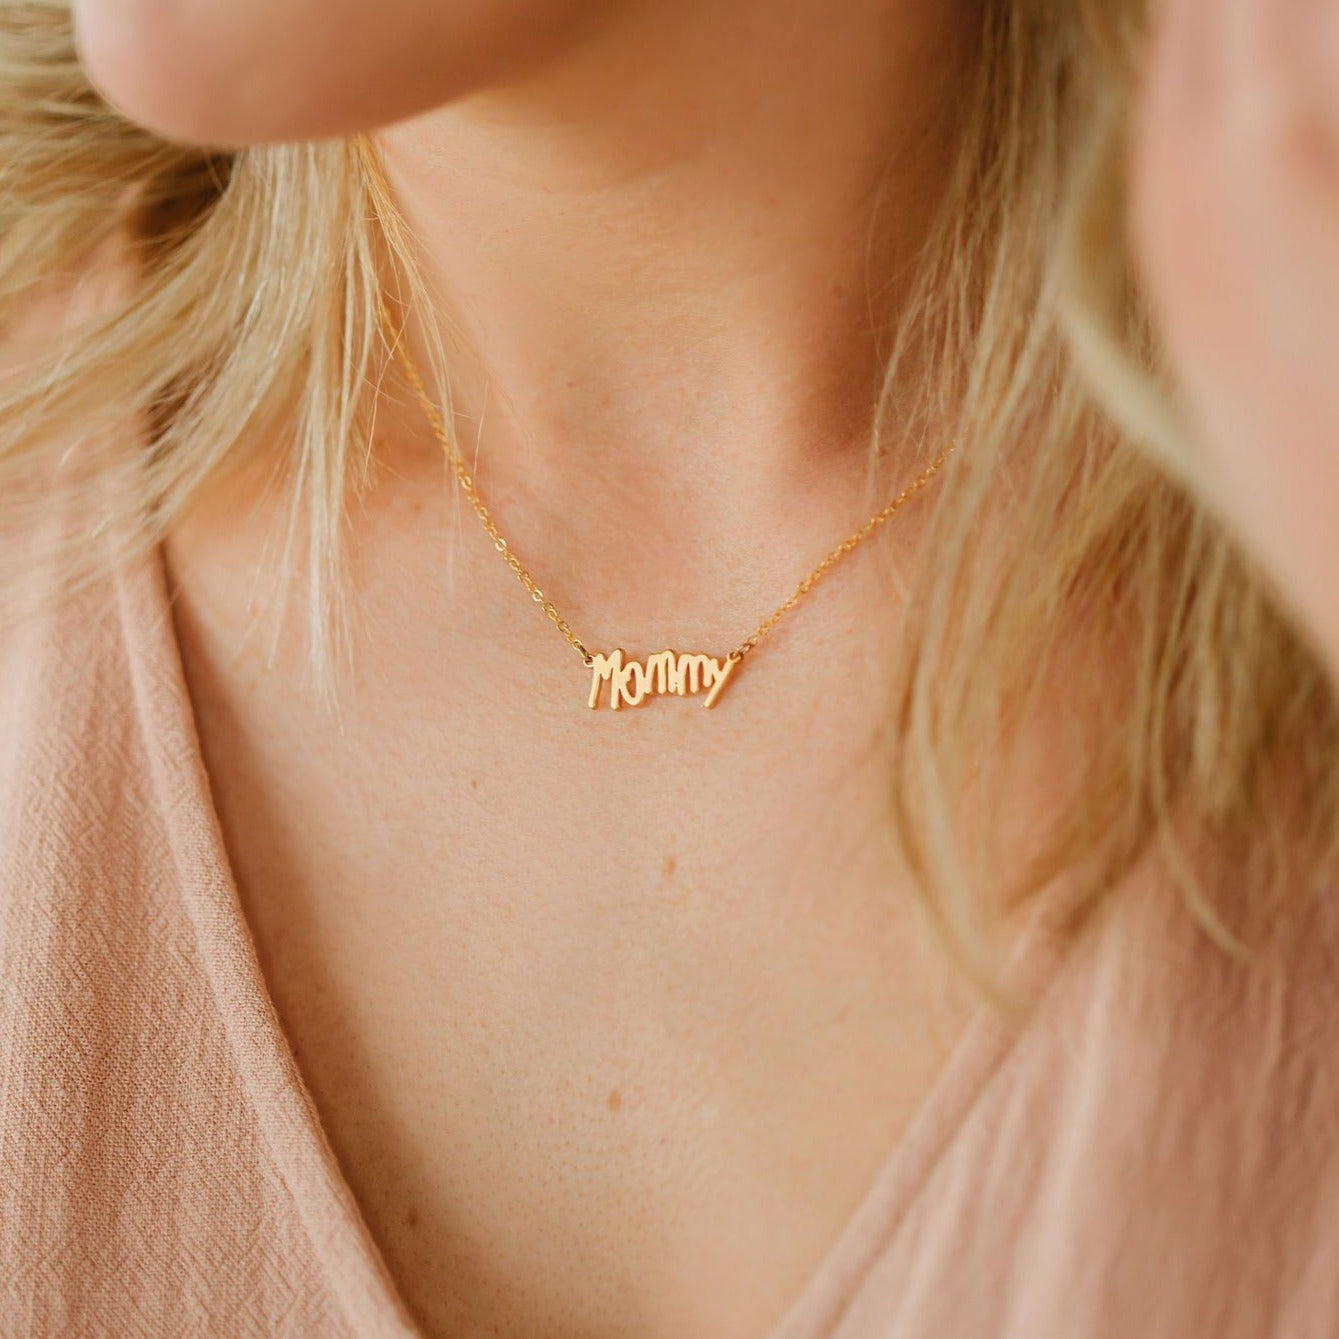 Woman wearing necklace made from her daughter's handwriting